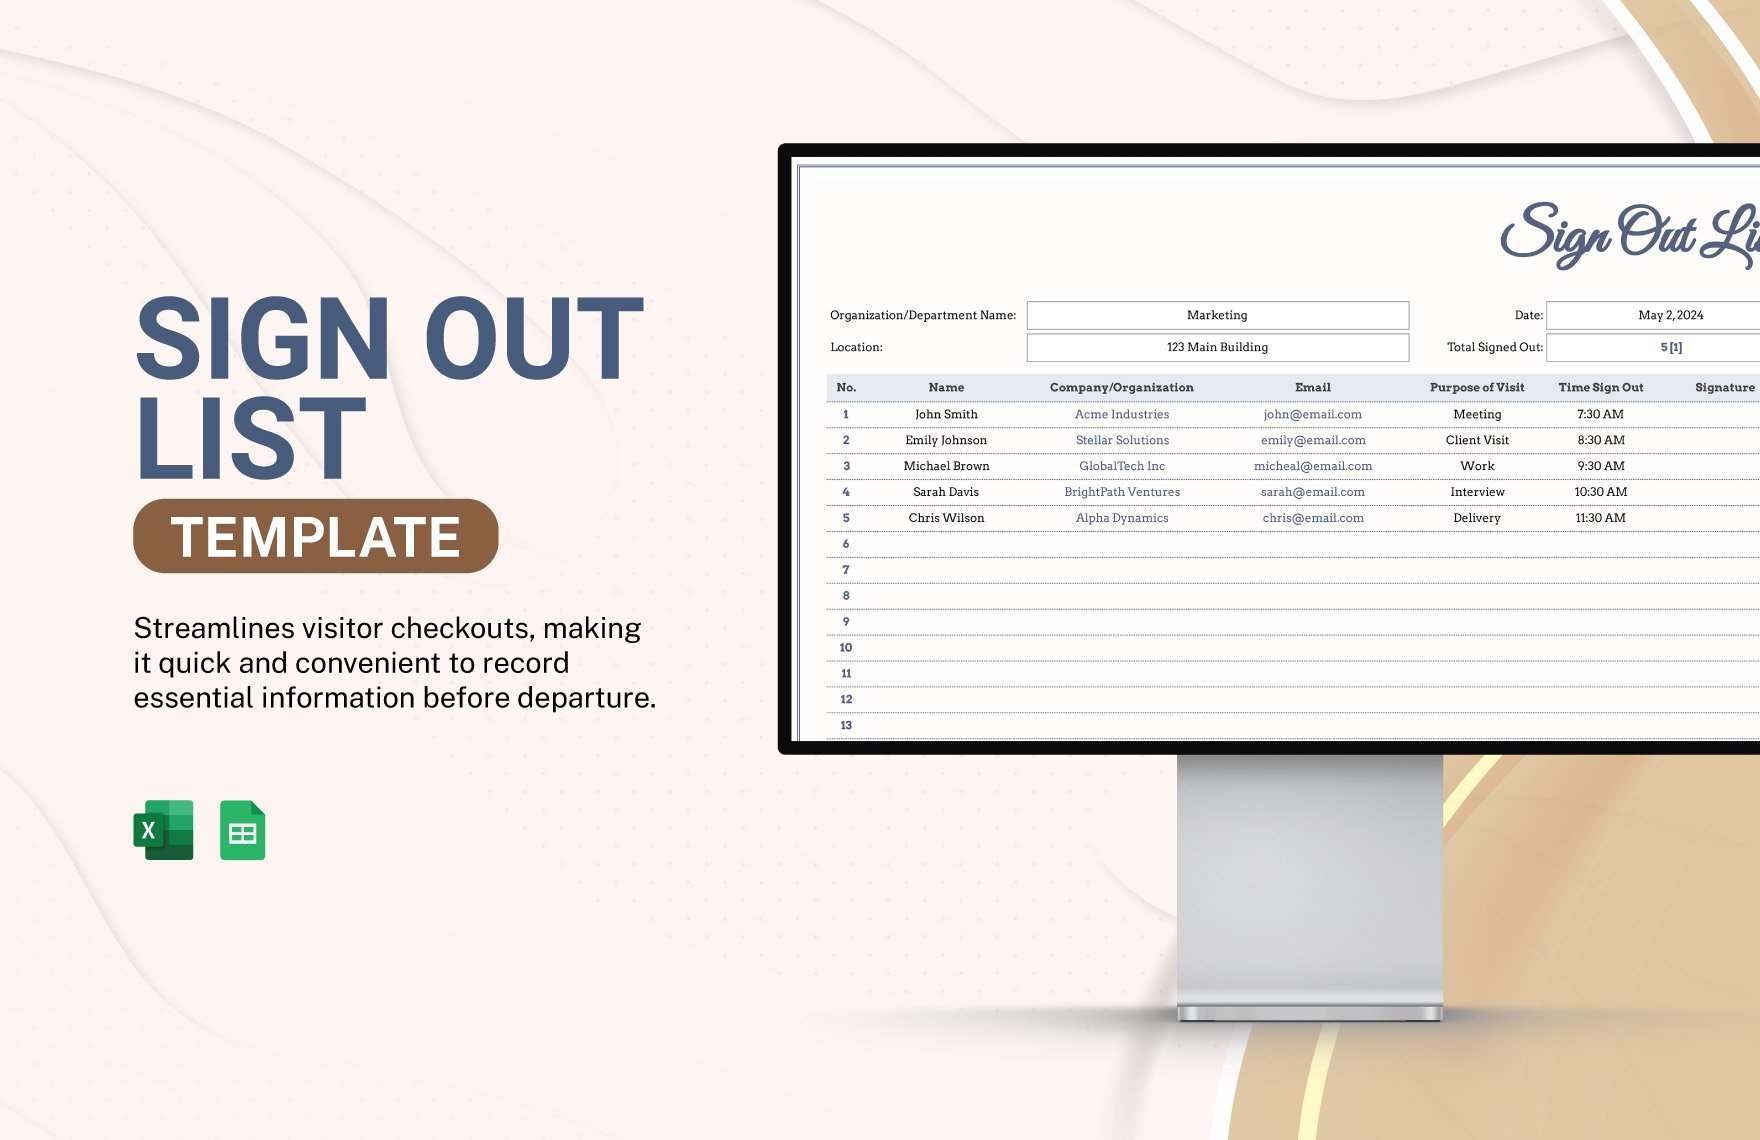 Sign Out List Template in Excel, Google Sheets